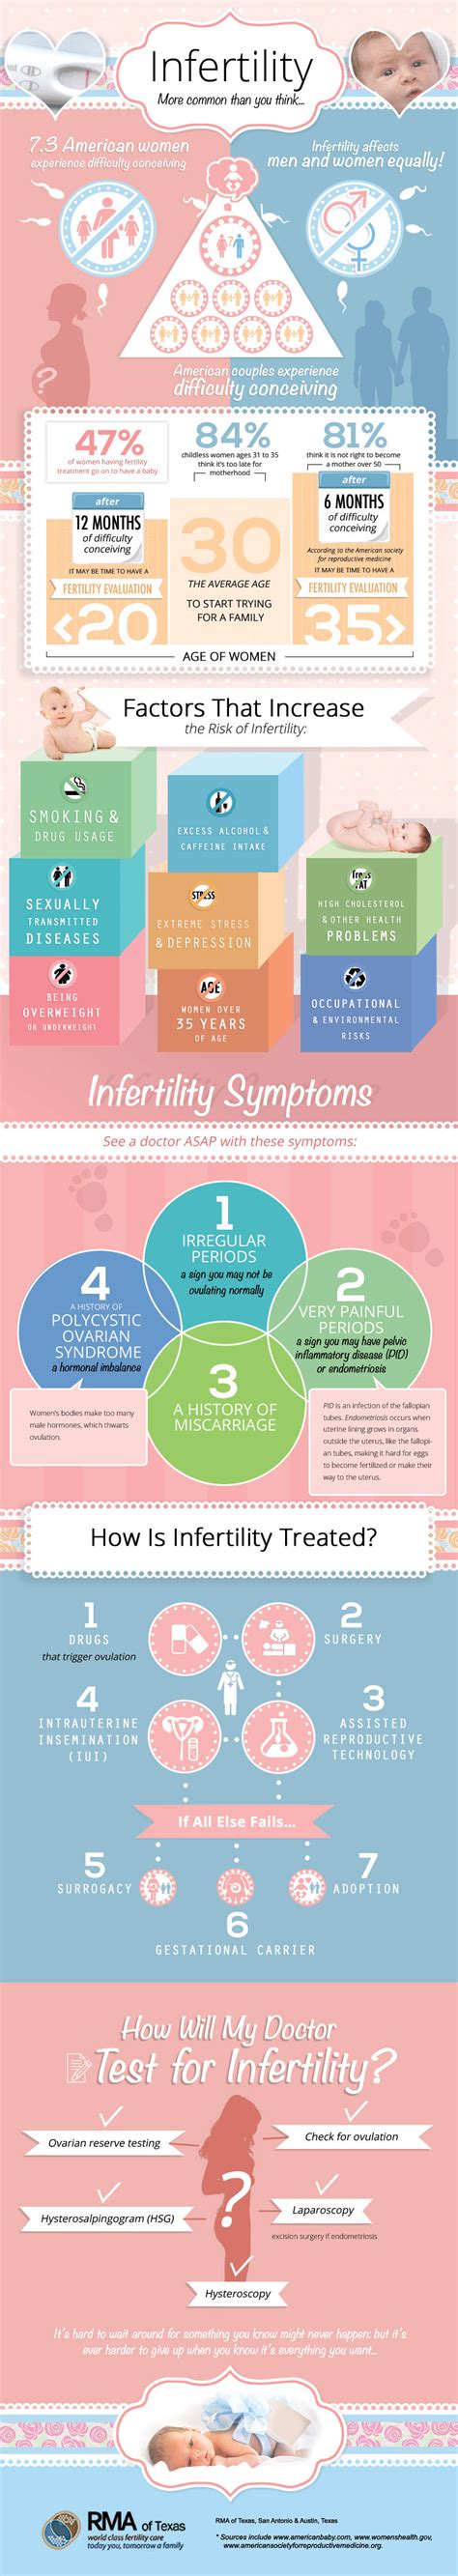 Infertility Information And Statistics Infographic